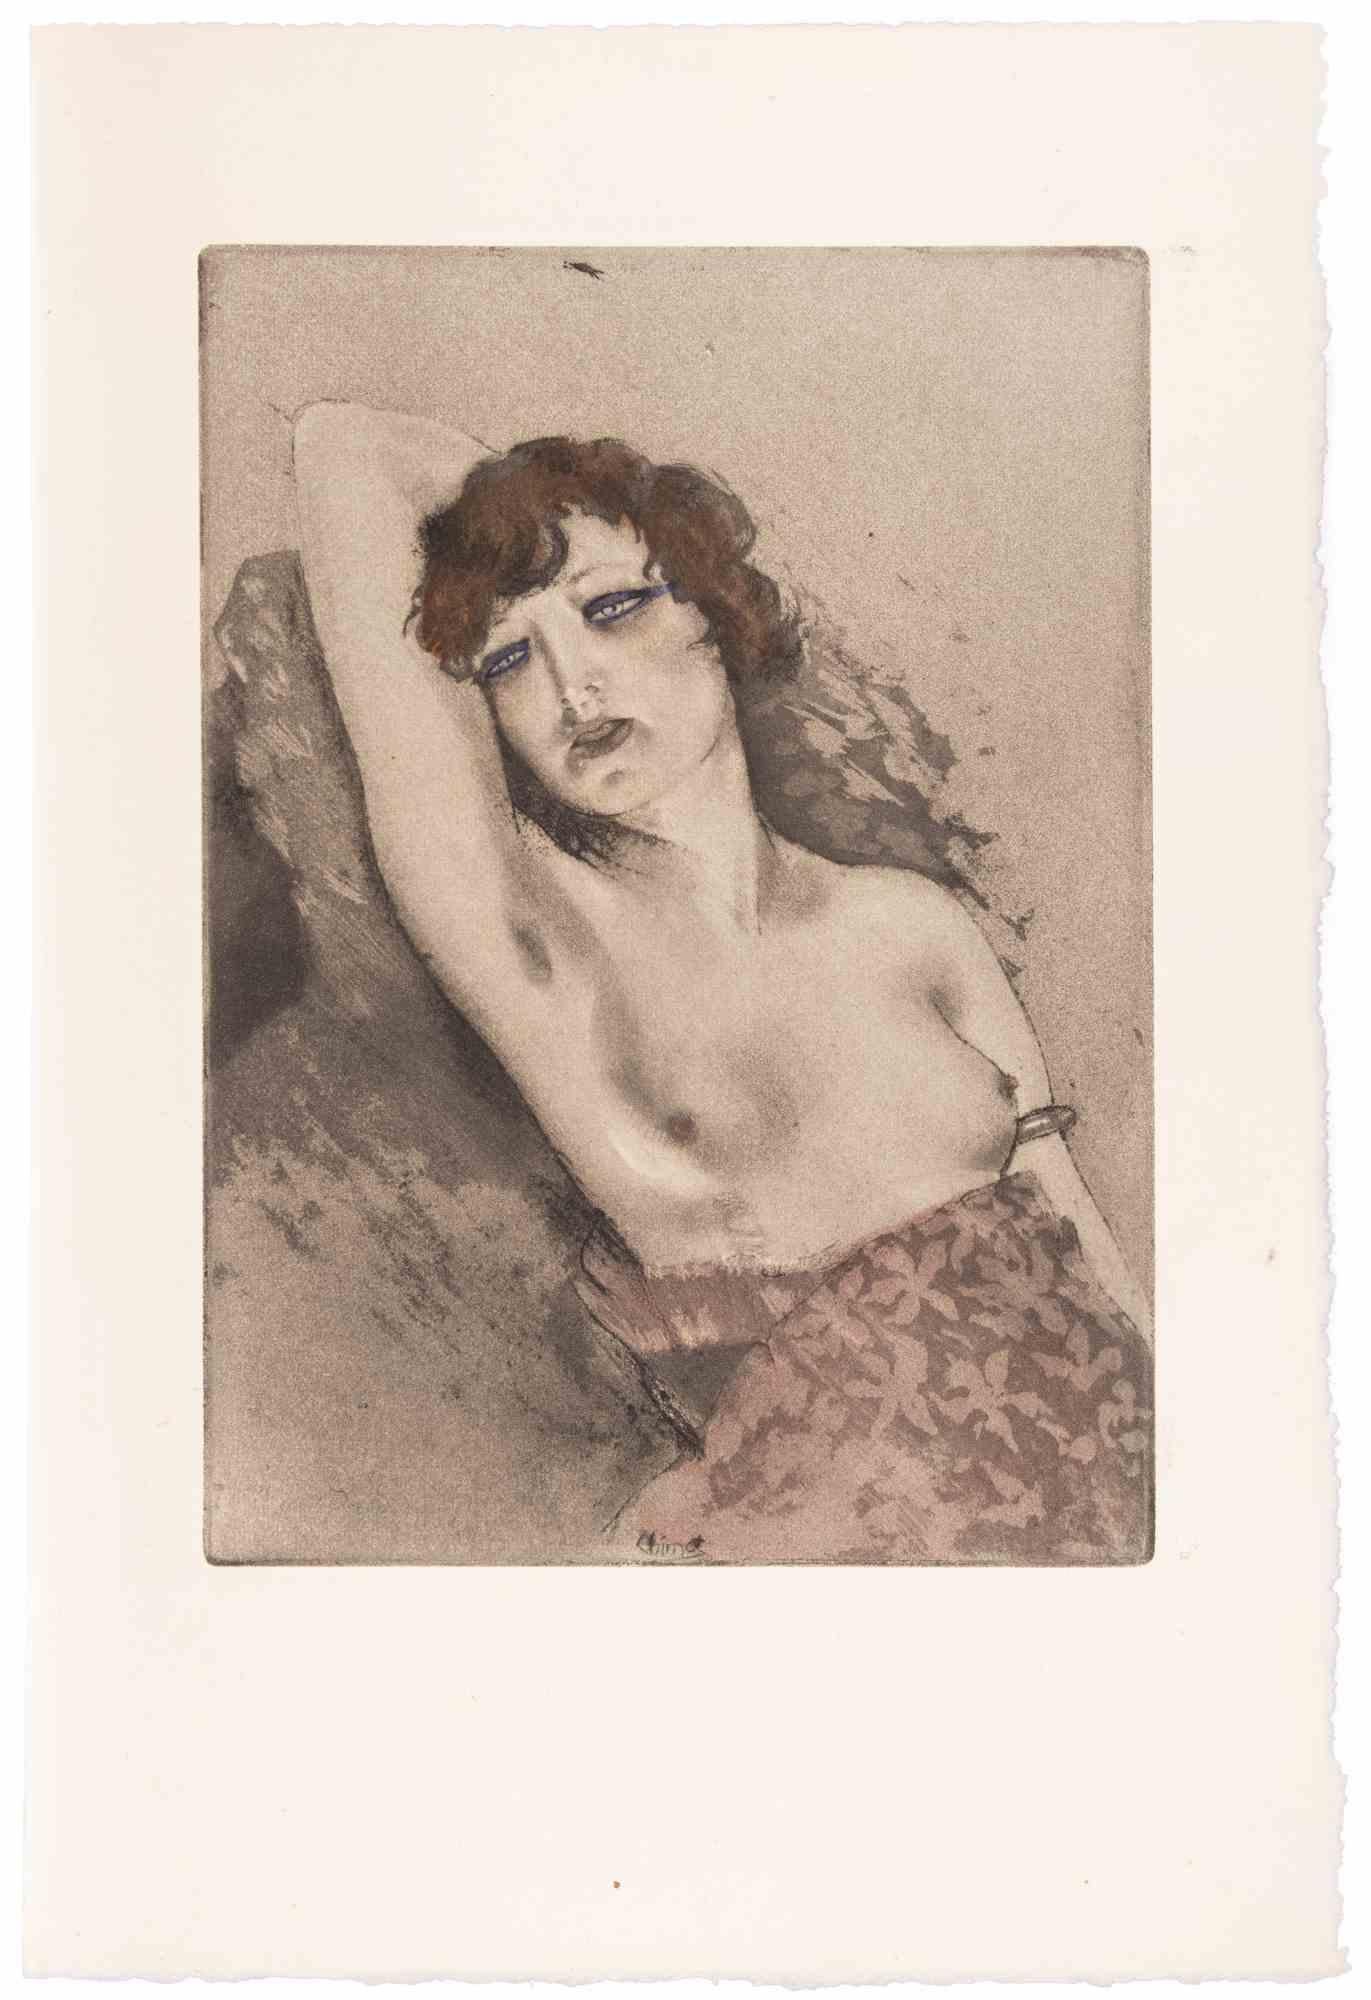 Nude of Woman is an Etching realized by Edouard Chimot in 1930s.

The very beautiful artwork is in good condition.

No Signature.

Represents a nude young lady.

Édouard Chimot (26 November 1880 – 7 June 1959) was a French artist, illustrator and